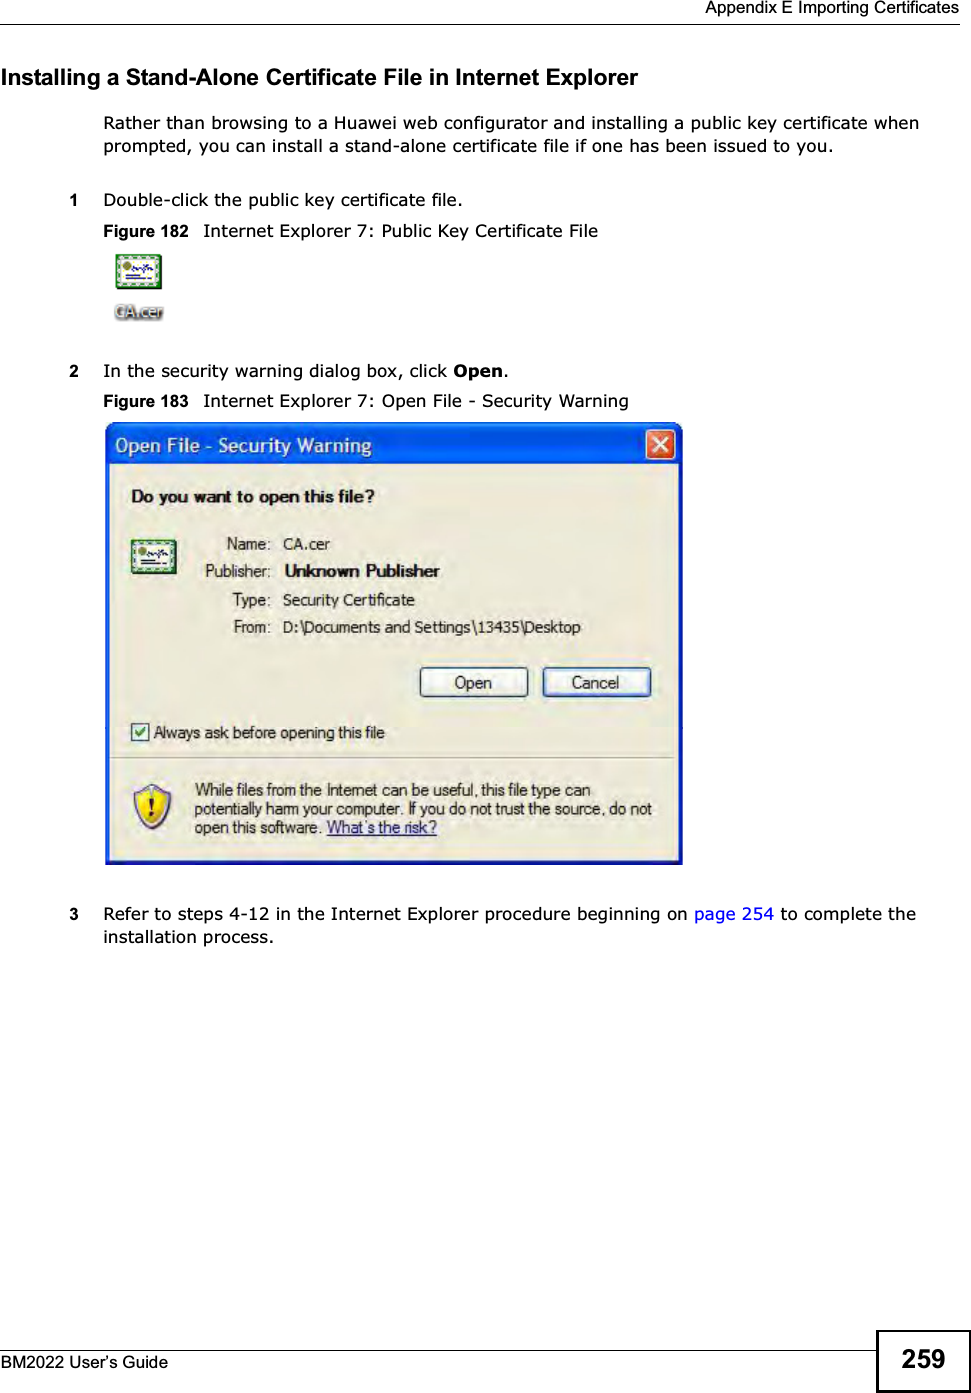  Appendix E Importing CertificatesBM2022 Users Guide 259Installing a Stand-Alone Certificate File in Internet ExplorerRather than browsing to a Huawei web configurator and installing a public key certificate when prompted, you can install a stand-alone certificate file if one has been issued to you.1Double-click the public key certificate file.Figure 182   Internet Explorer 7: Public Key Certificate File2In the security warning dialog box, click Open.Figure 183   Internet Explorer 7: Open File - Security Warning3Refer to steps 4-12 in the Internet Explorer procedure beginning on page 254 to complete the installation process.